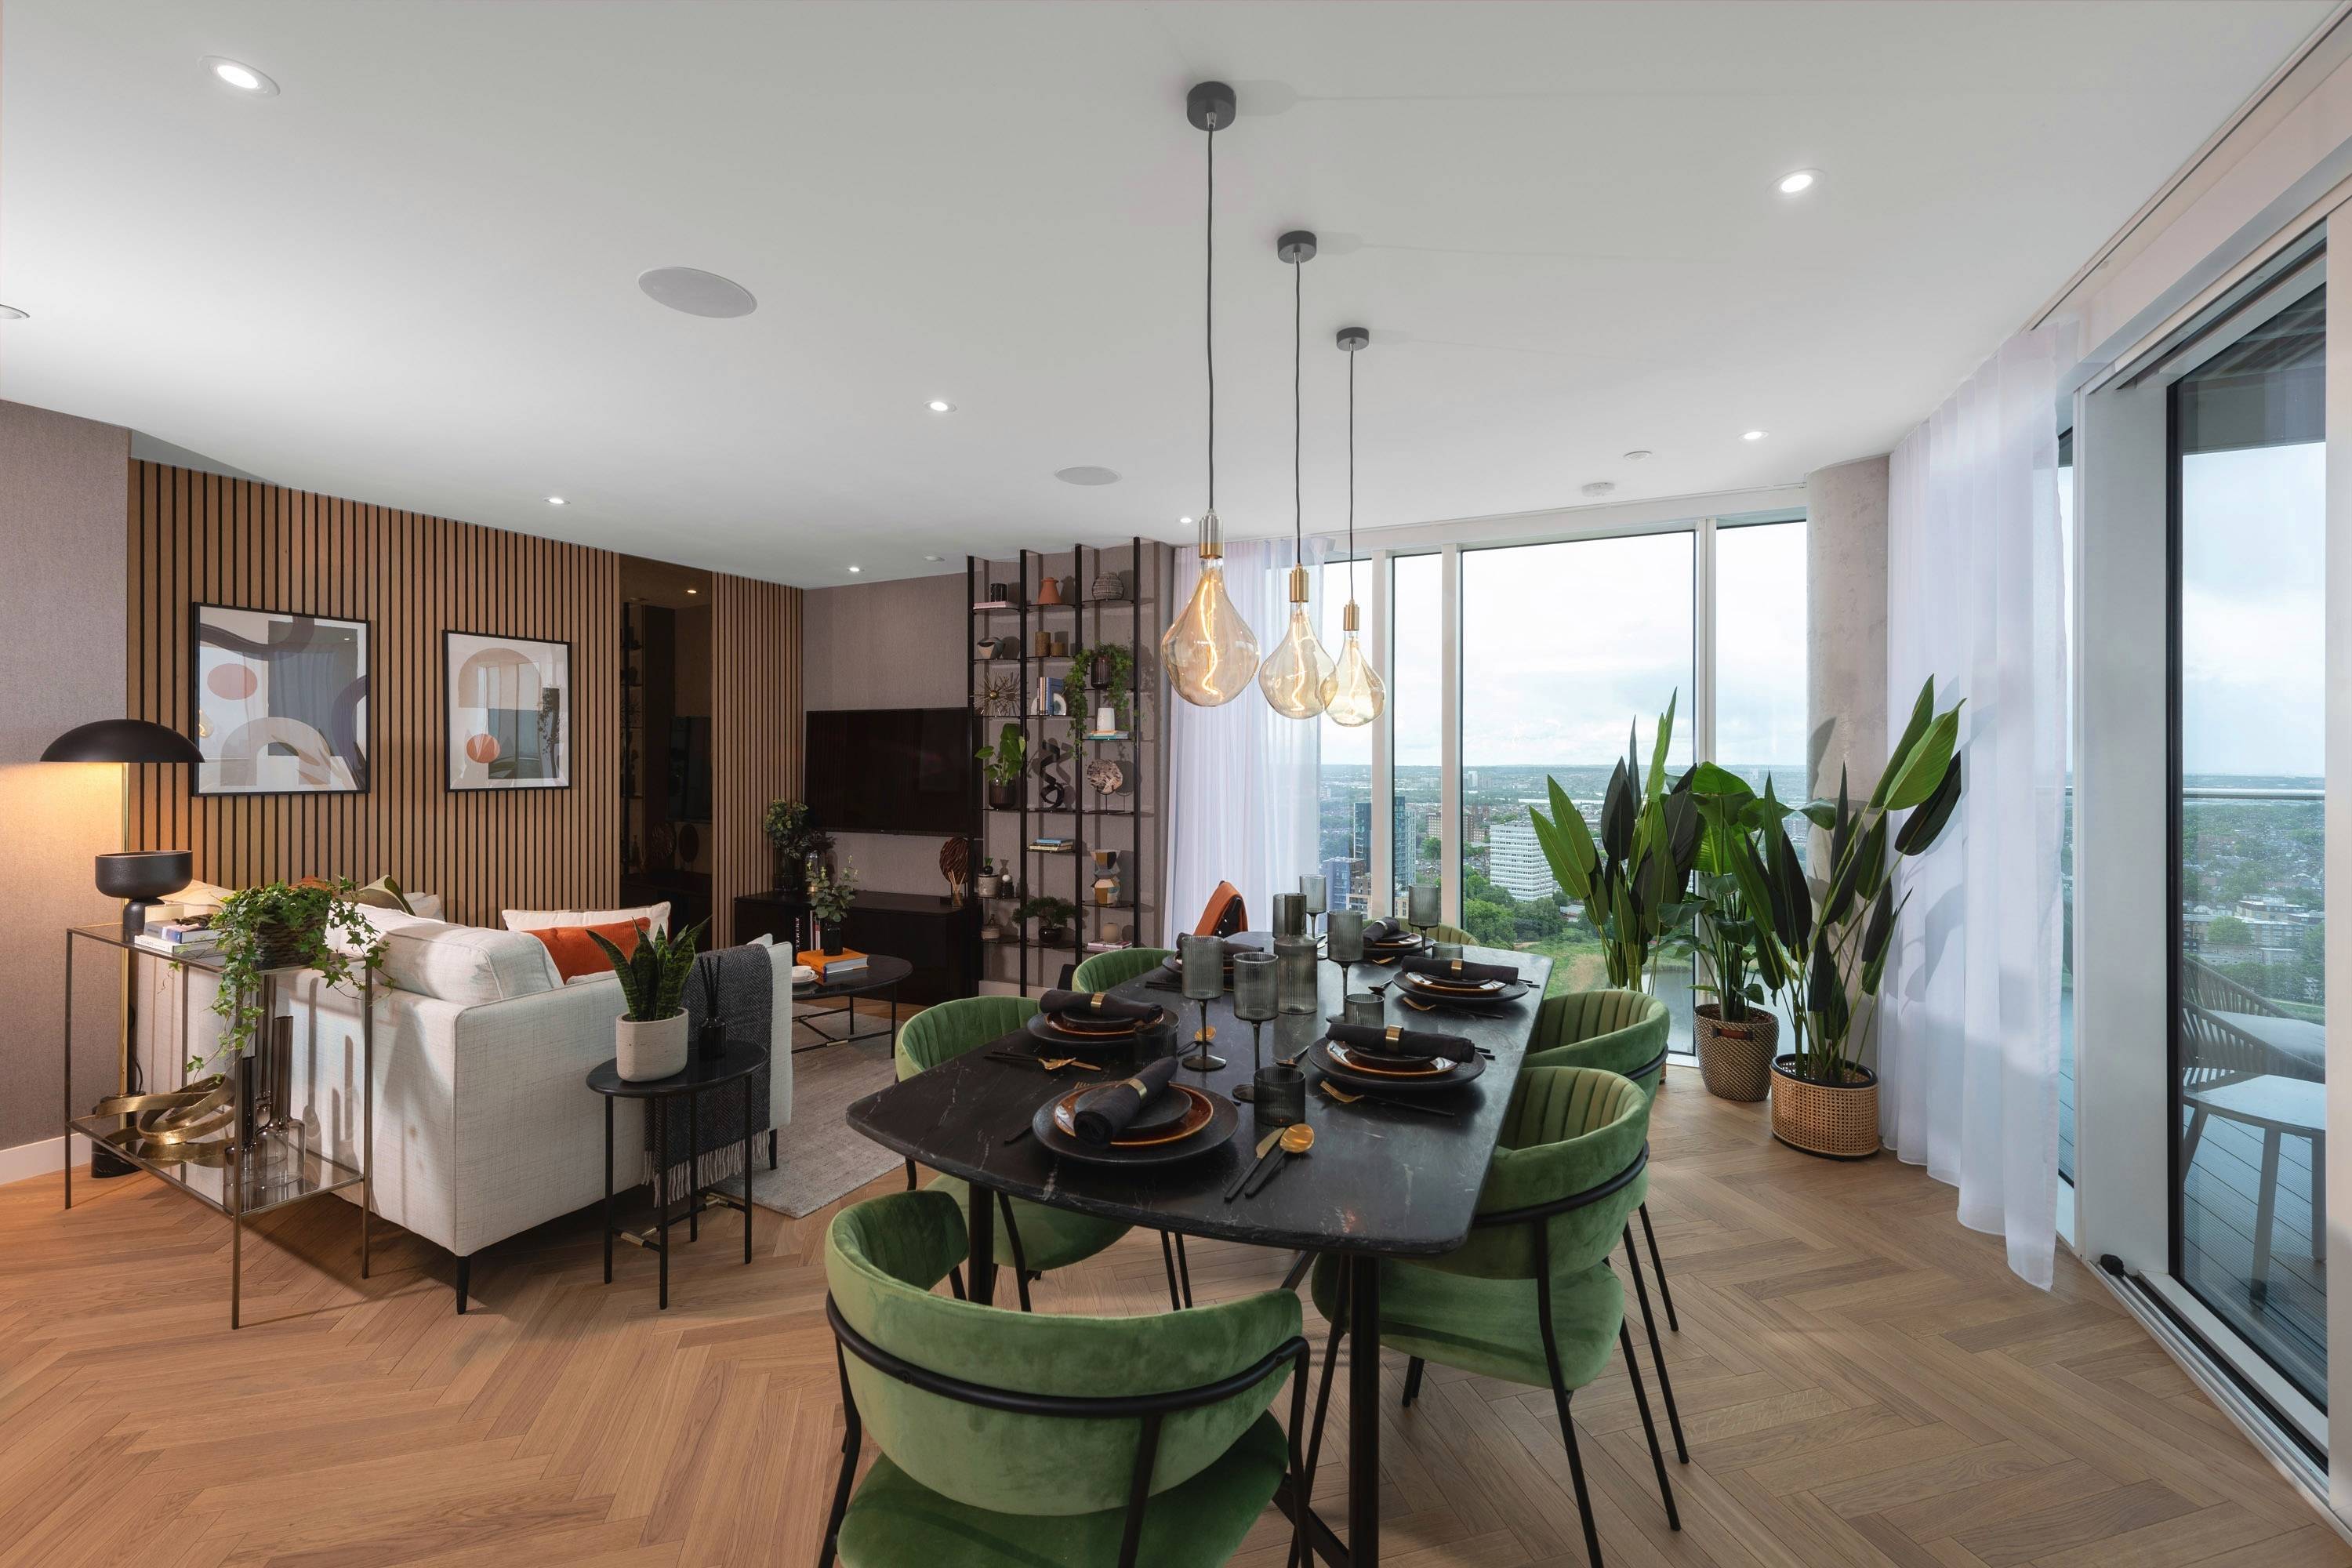 Hidden Oasis, 10 minutes from Central London -  Luxury 2-Bedroom Penthouse in a Stunning New Development Surrounded by Nature - Seventeenth Floor - Reservoirs and Park Views